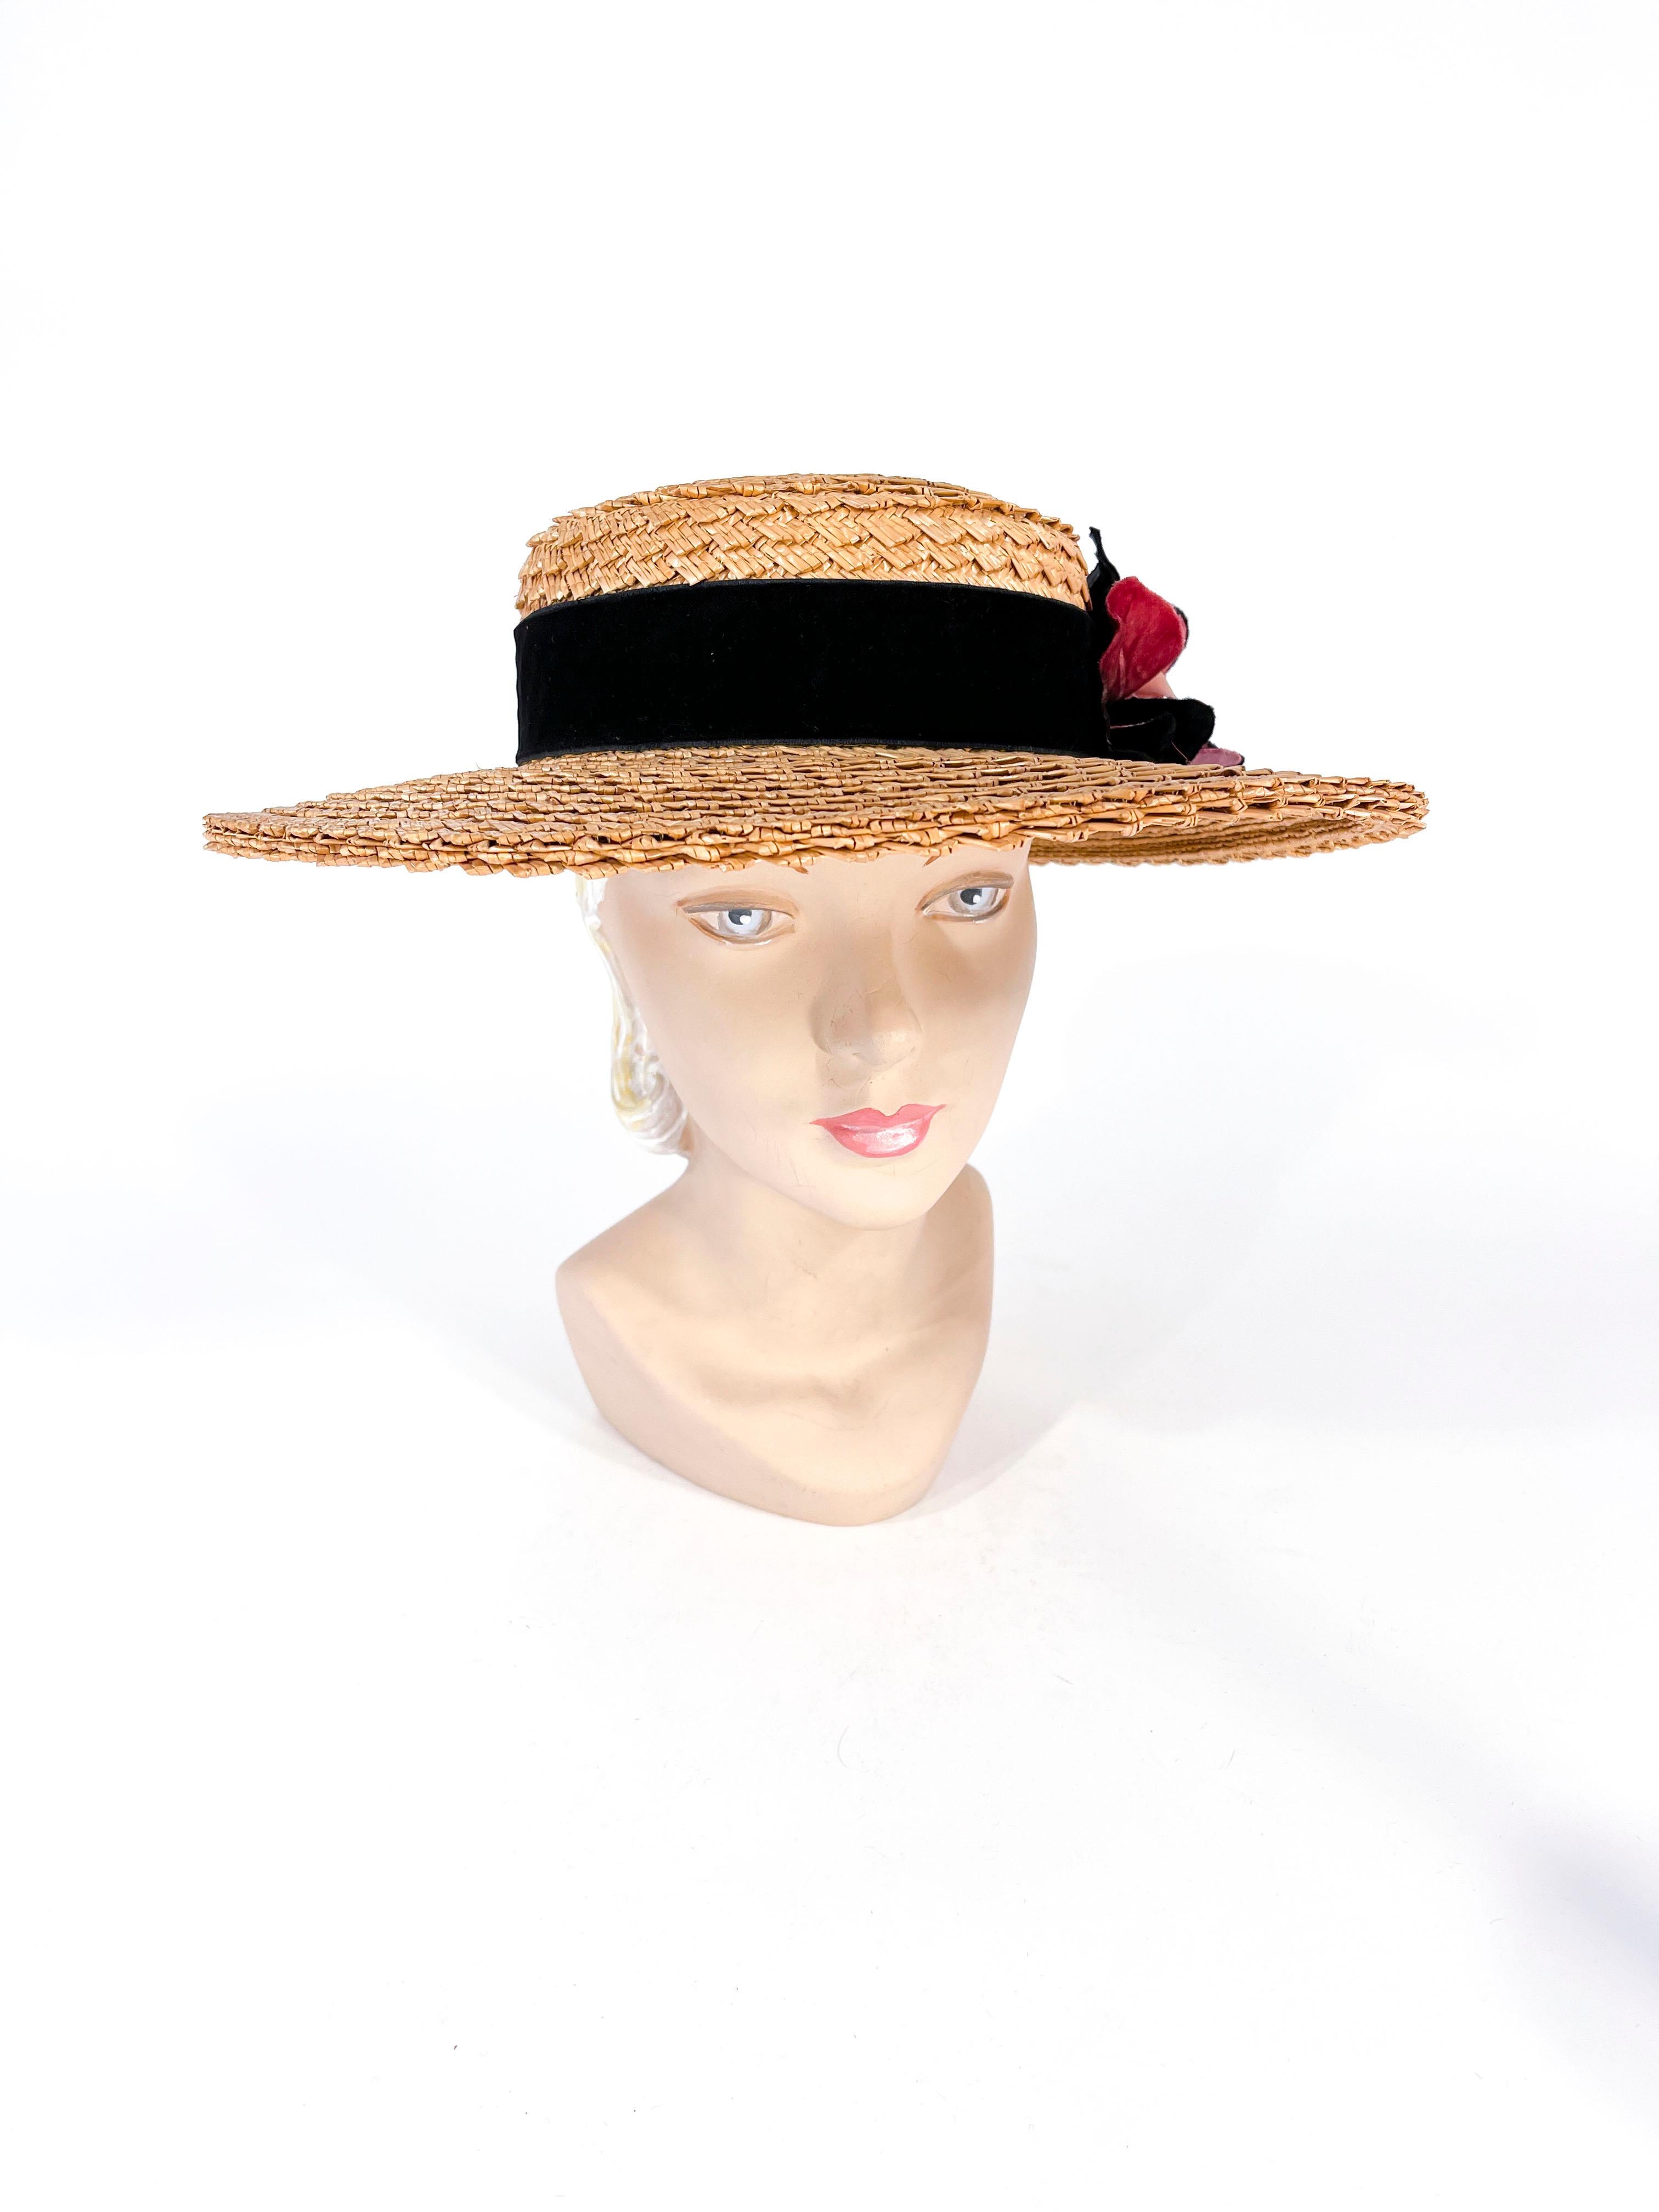 1930s ladies handwoven straw skimmer decorated with a wide black velvet band. The band is finished with handmade multi-colored silk and velvet flowers. The interior of the crown is unlined and finished with a grosgrain band. The interior